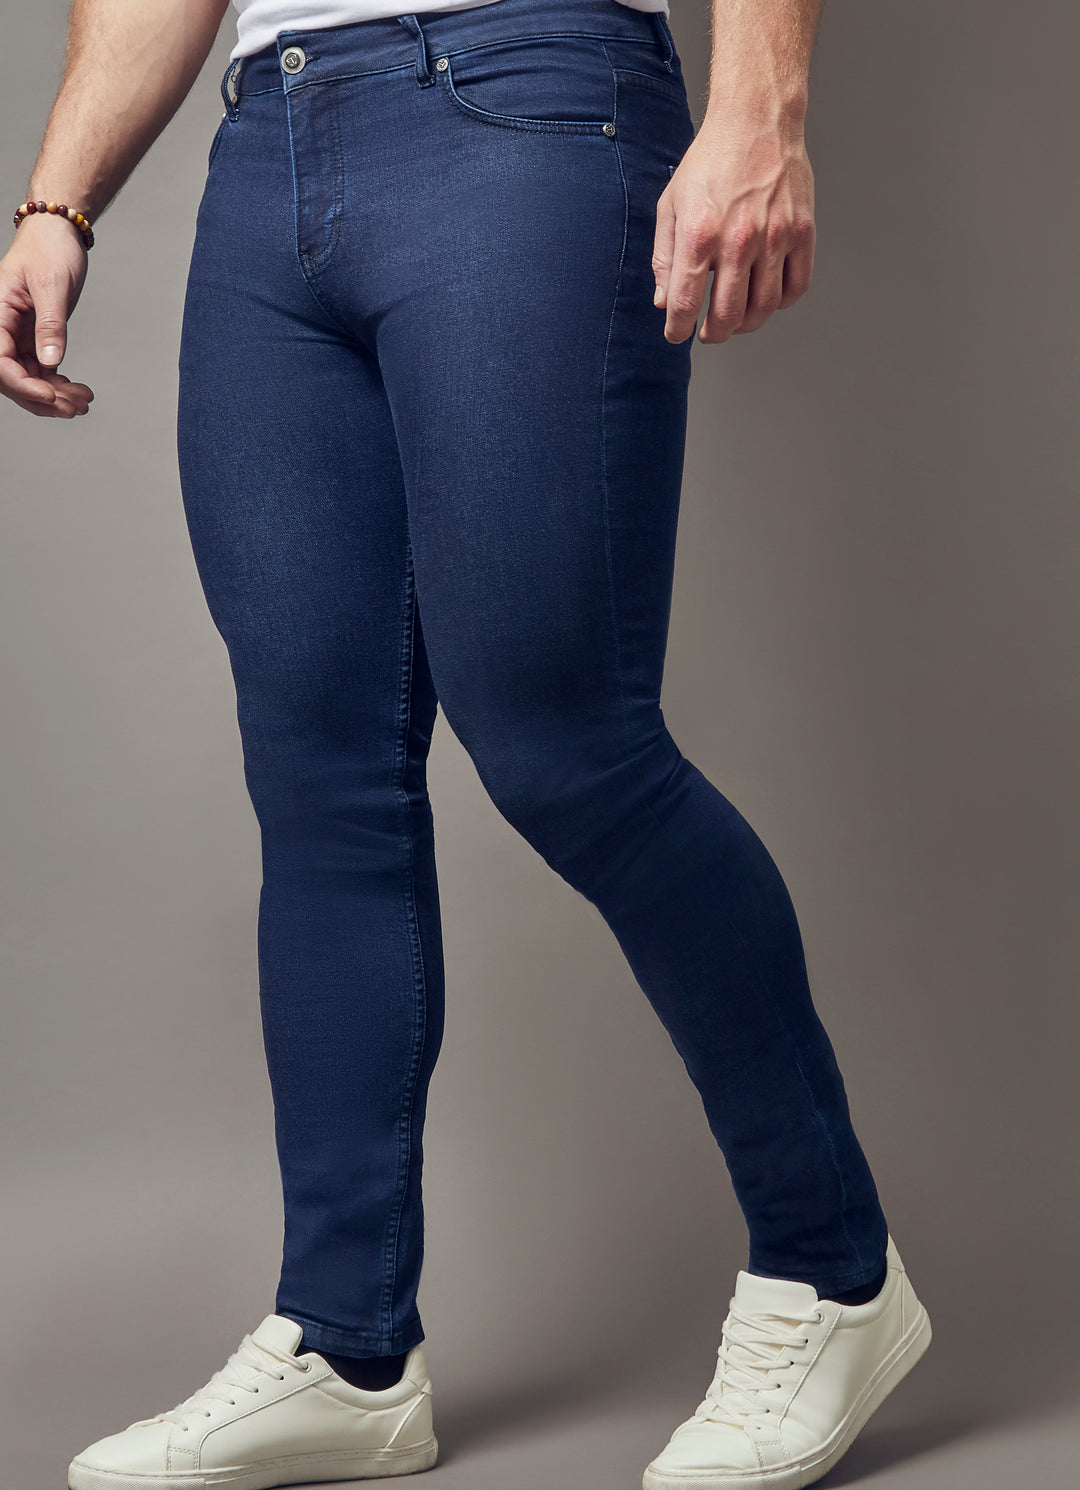 Navy Tapered Athletic Fit Jeans